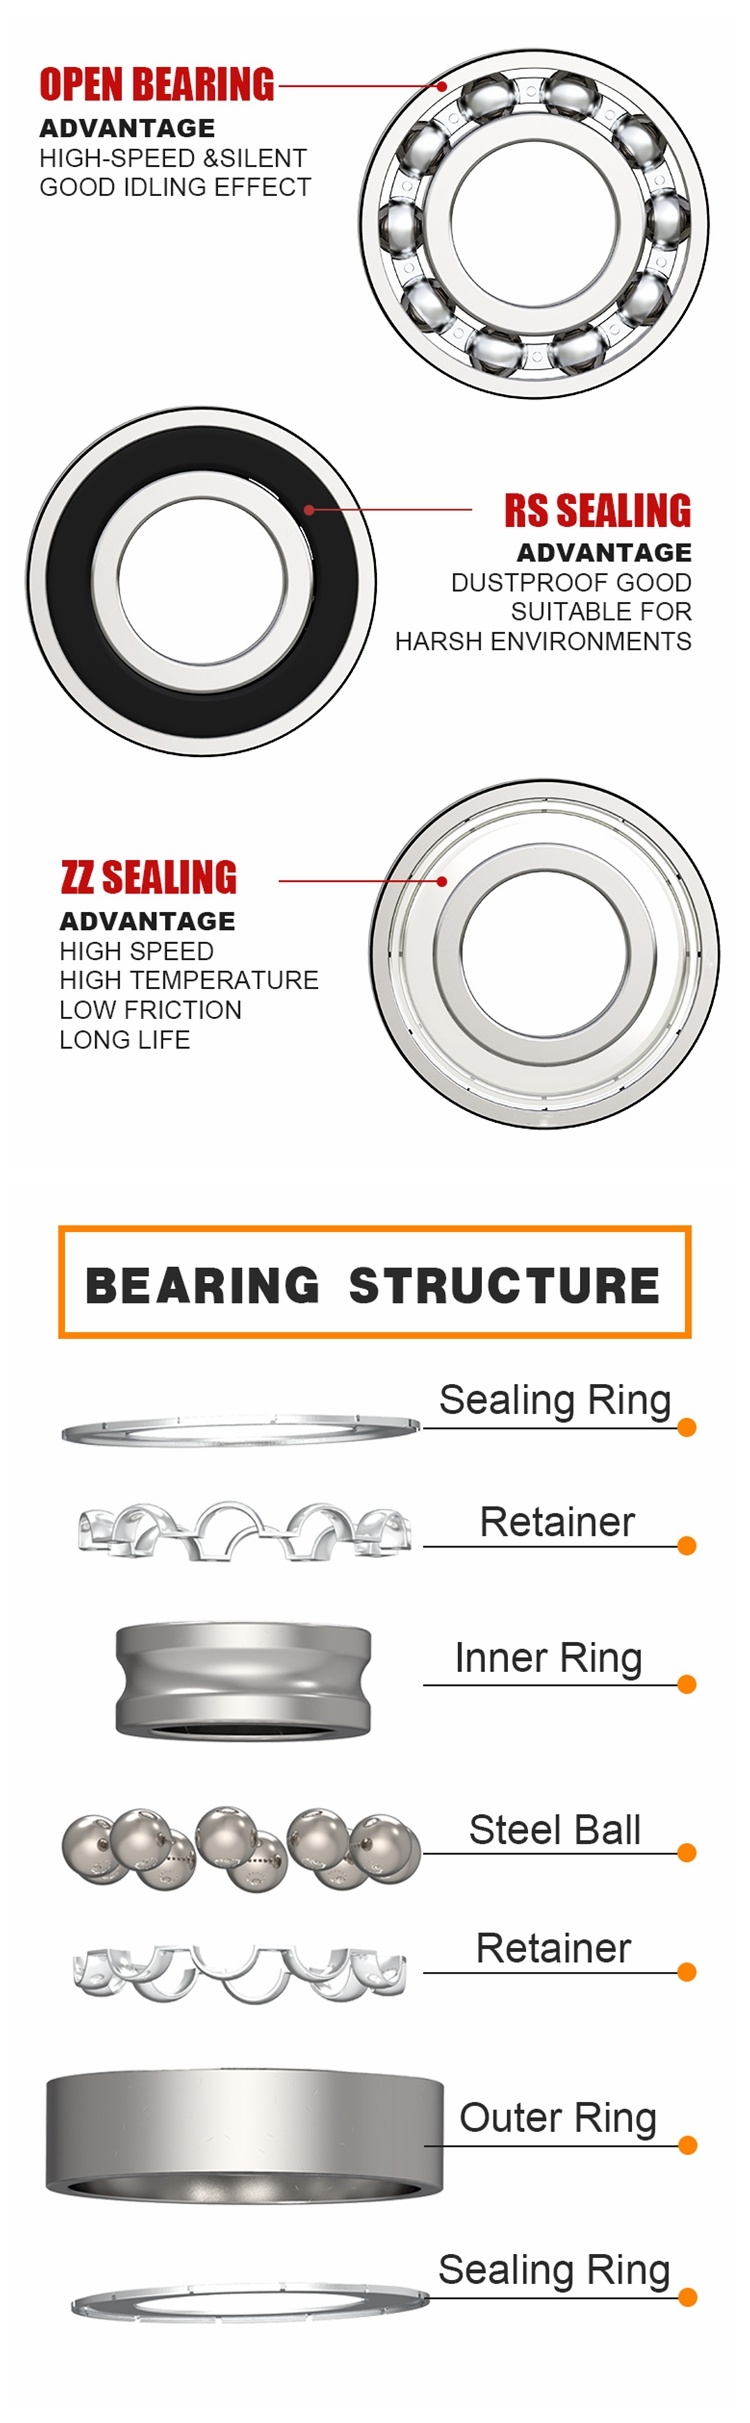 ABEC-1 Auto Parts Z2 V2 6708 RS Deep Groove Ball Bearings